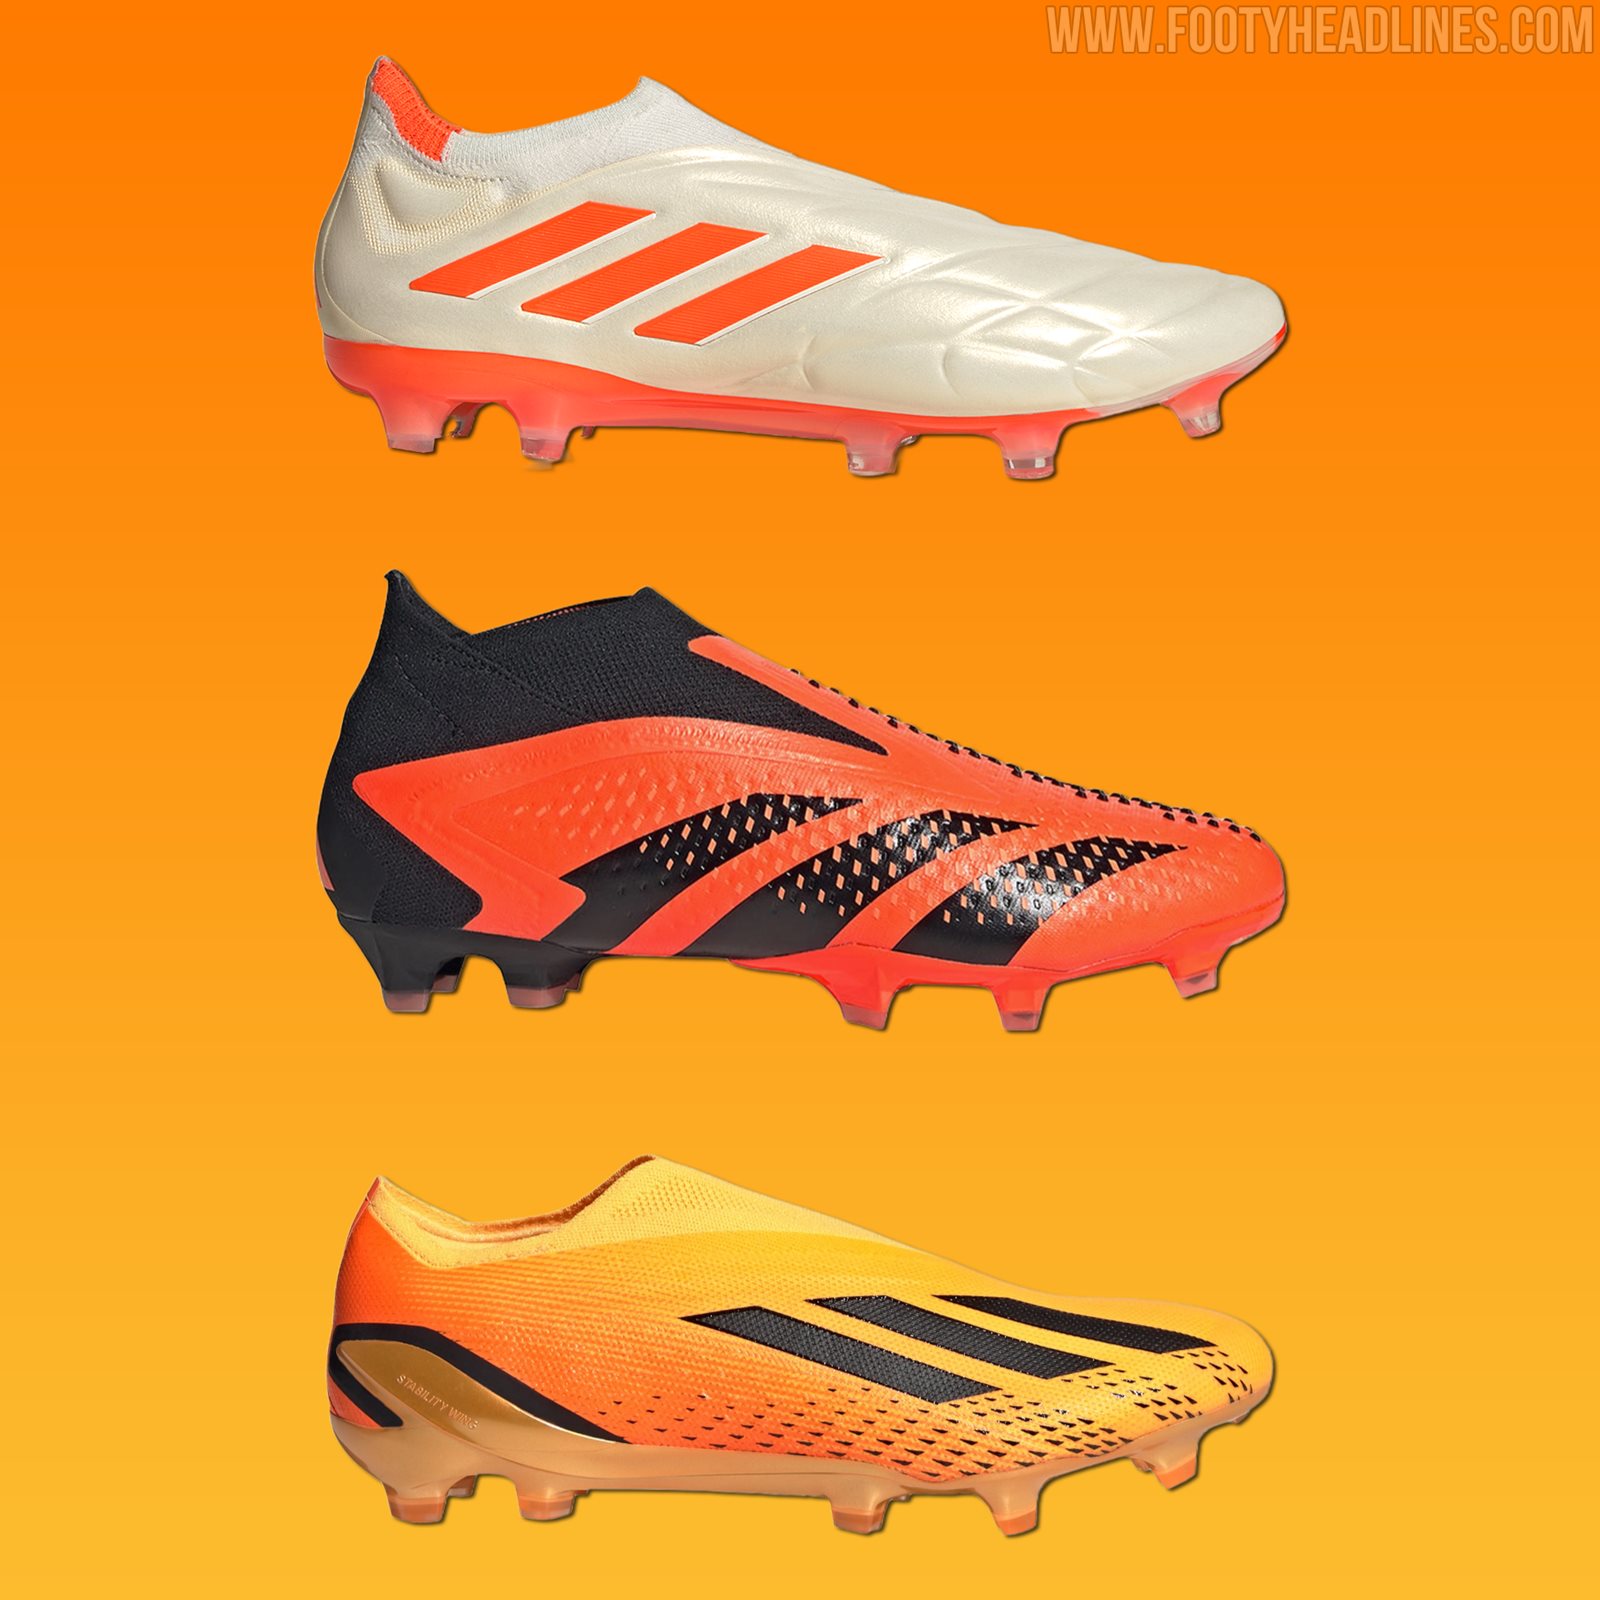 Adidas 2023 "Heatspawn" Boots Pack Released - Adidas 22-23 Collection - To Be Worn By All Adidas Players - Footy Headlines